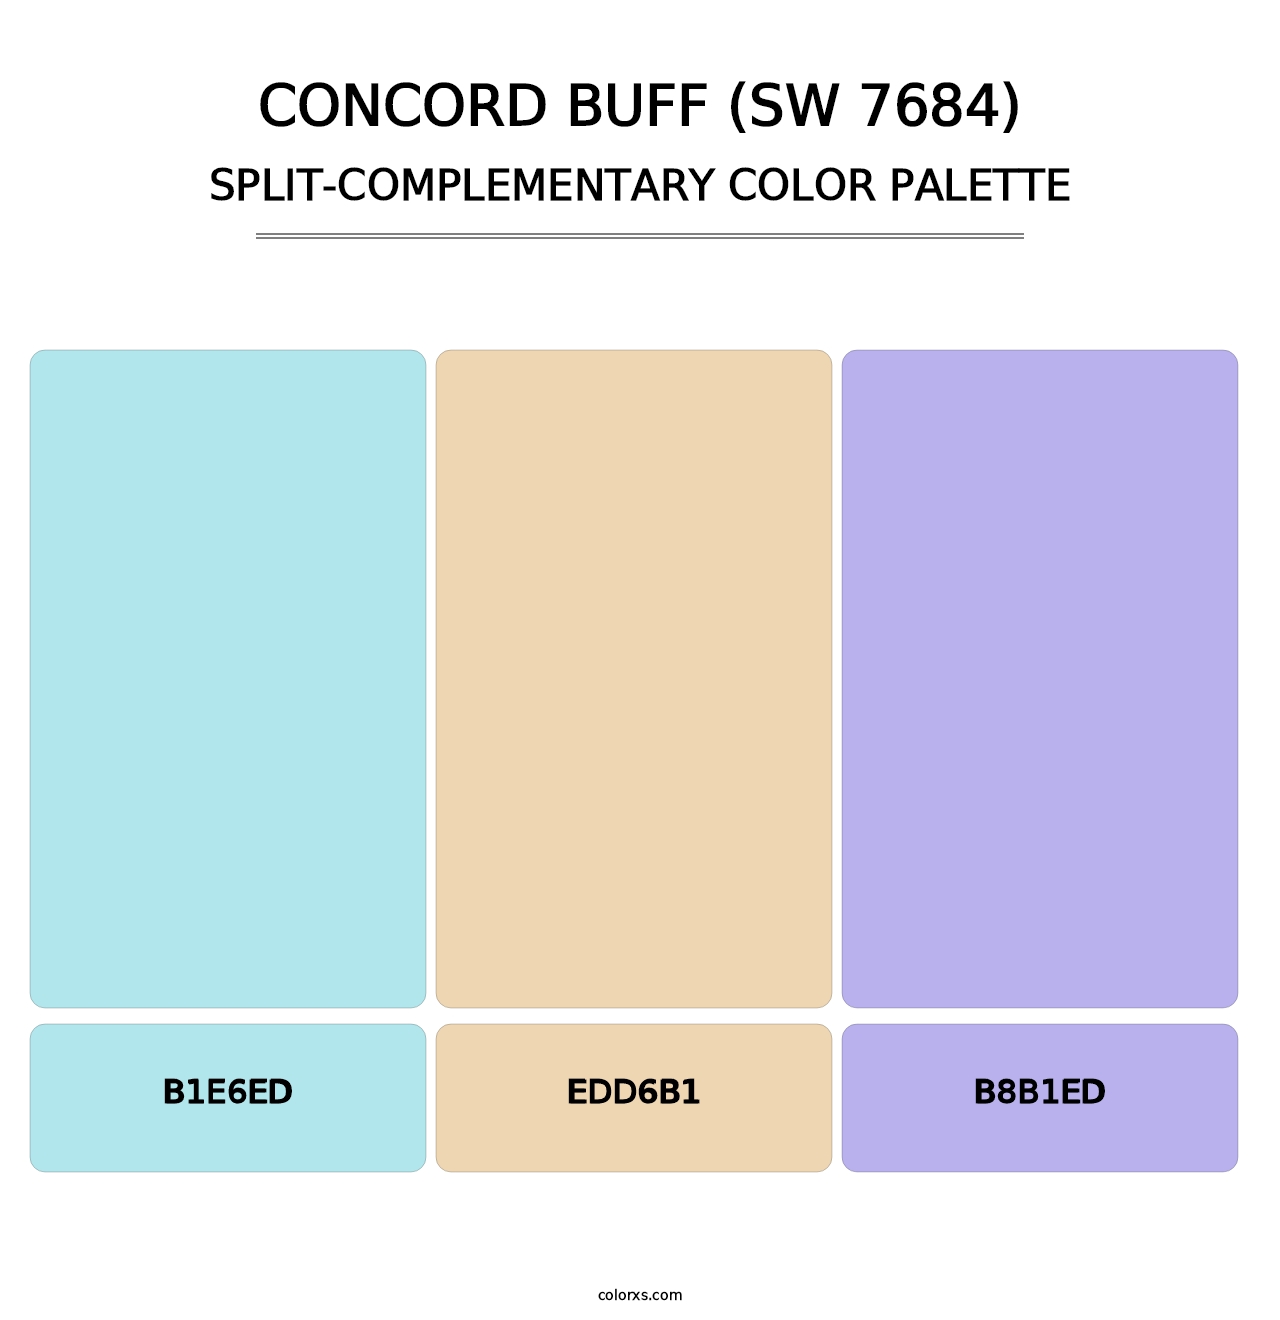 Concord Buff (SW 7684) - Split-Complementary Color Palette